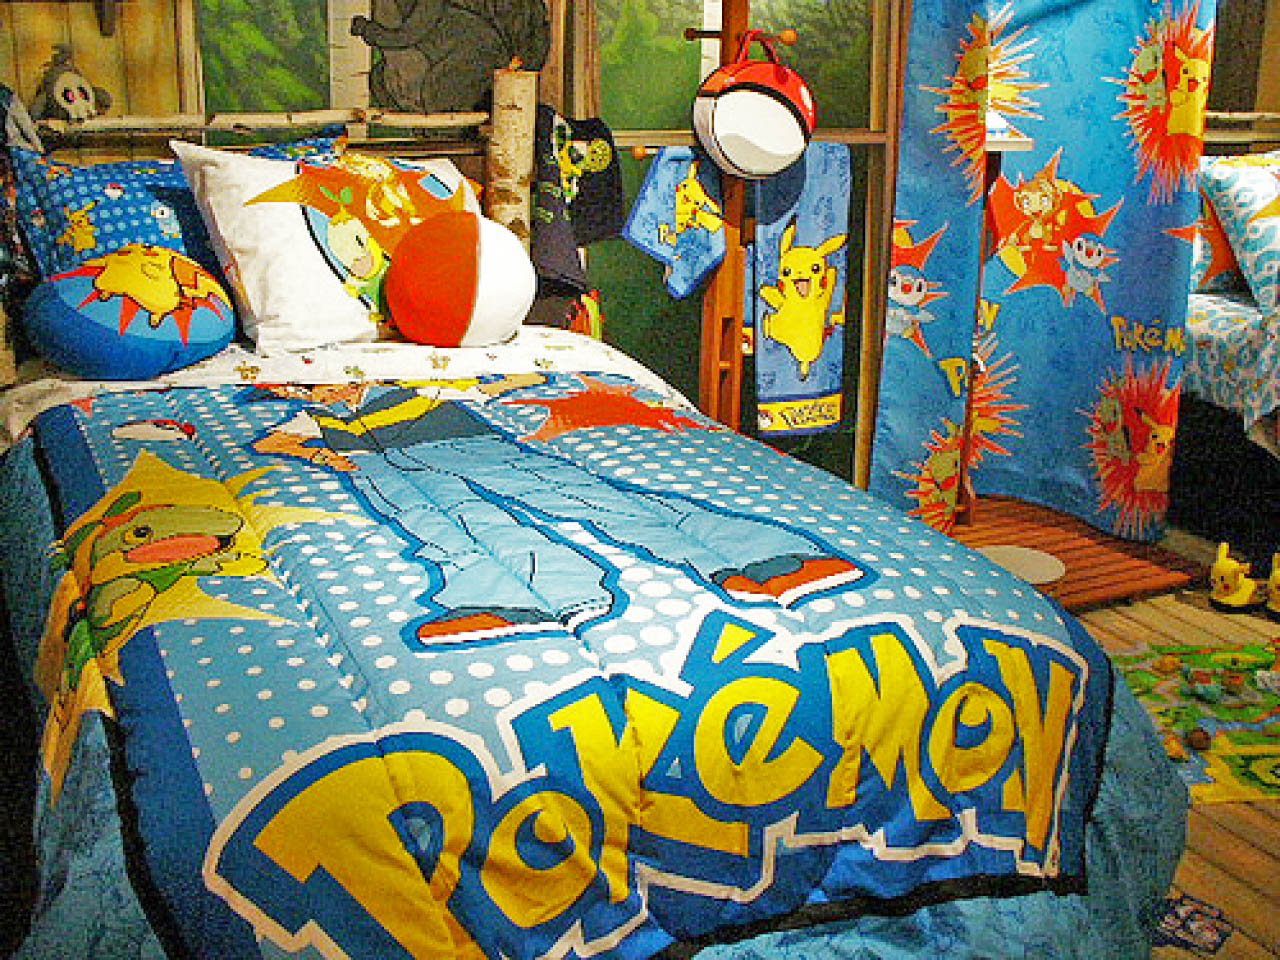 With the original Ash Ketchum, this Pokémon bed set is great for the new and original Pokémon fans.